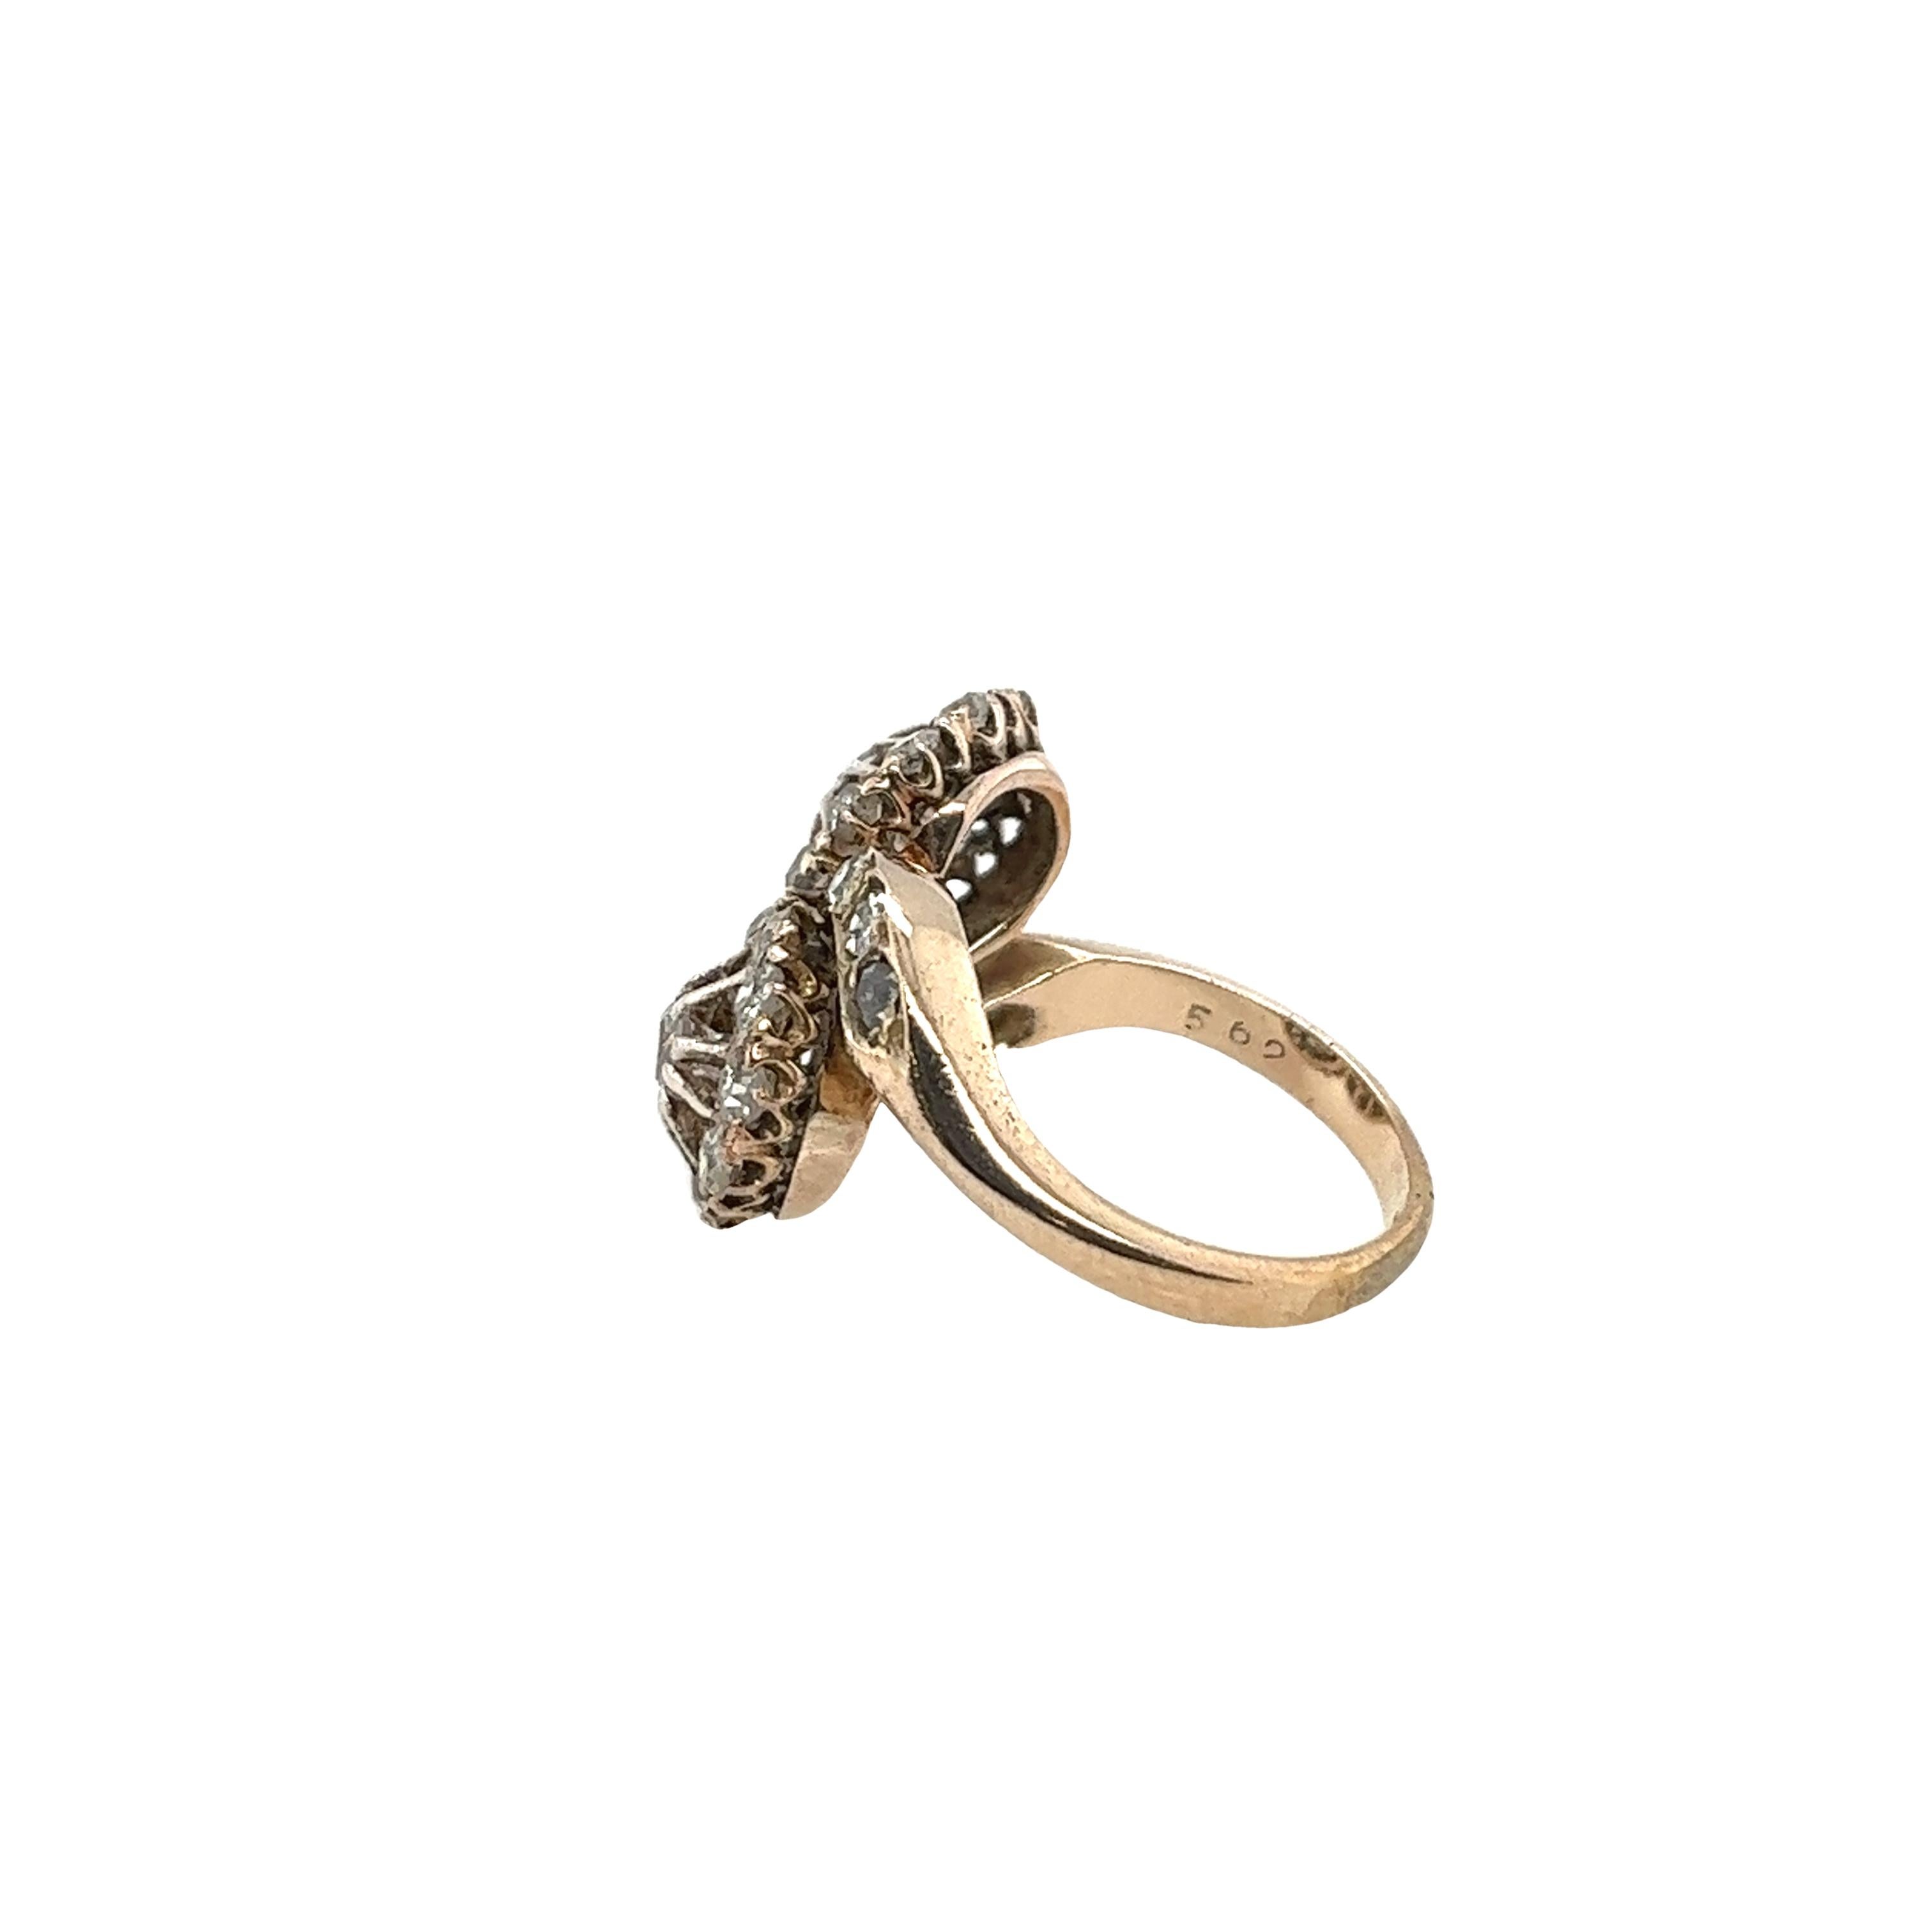 This vintage ring has a dazzling effect and is set in a cluster crossover setting in 14ct yellow gold with 0.70ct natural round old cut diamonds.
Total Diamond Weight: 0.70ct
Diamond Colour: L-M
Diamond Clarity: I
Width of Band: 2mm
Width of Head: